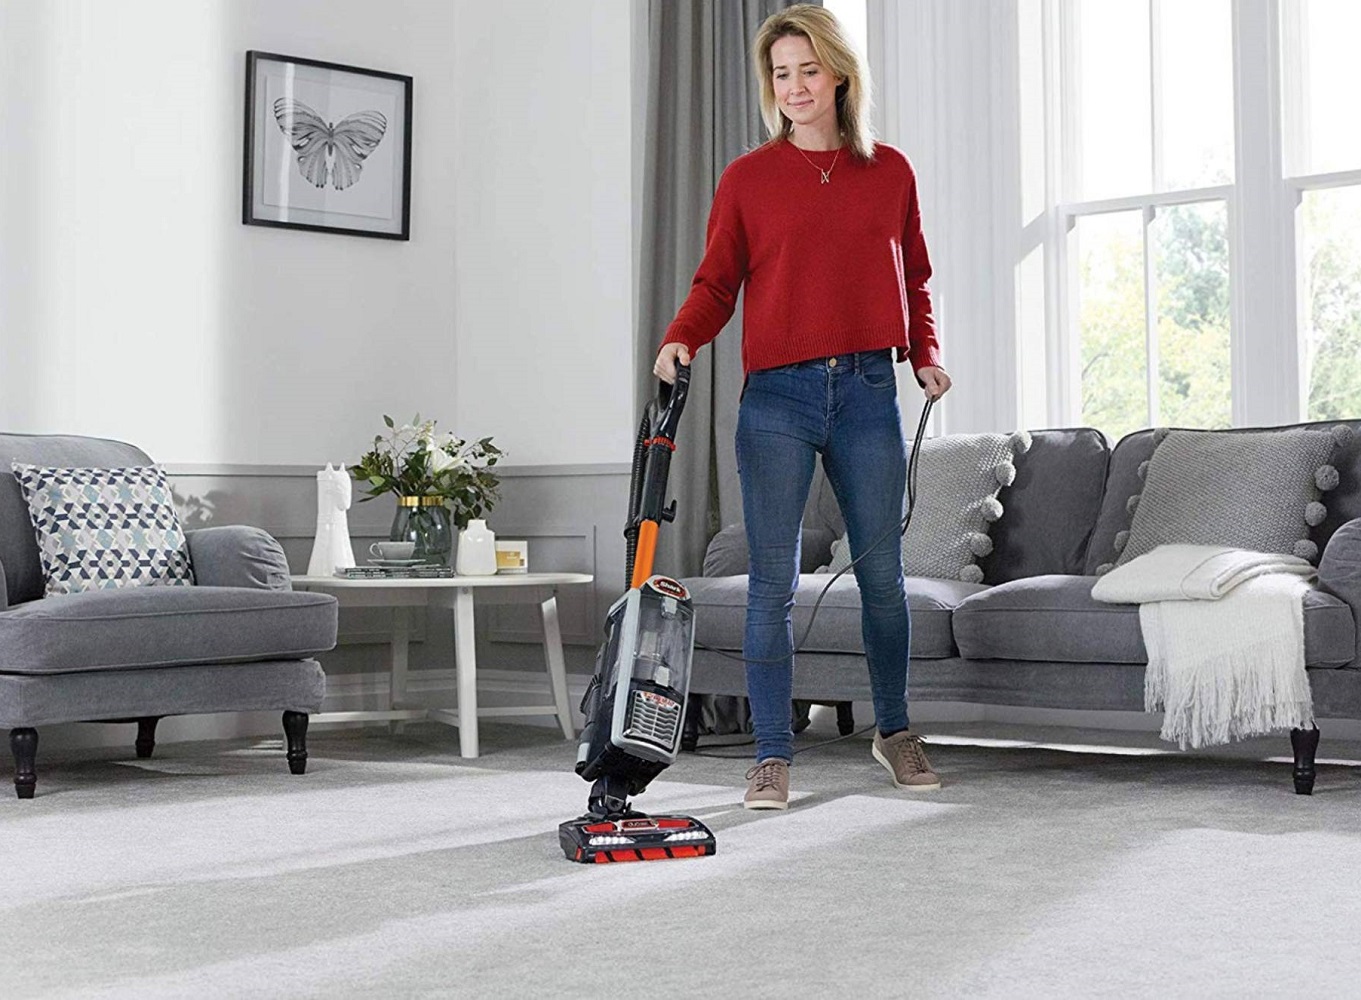 7 Best Upright Vacuum Cleaners for December 2022 | Check Reviews